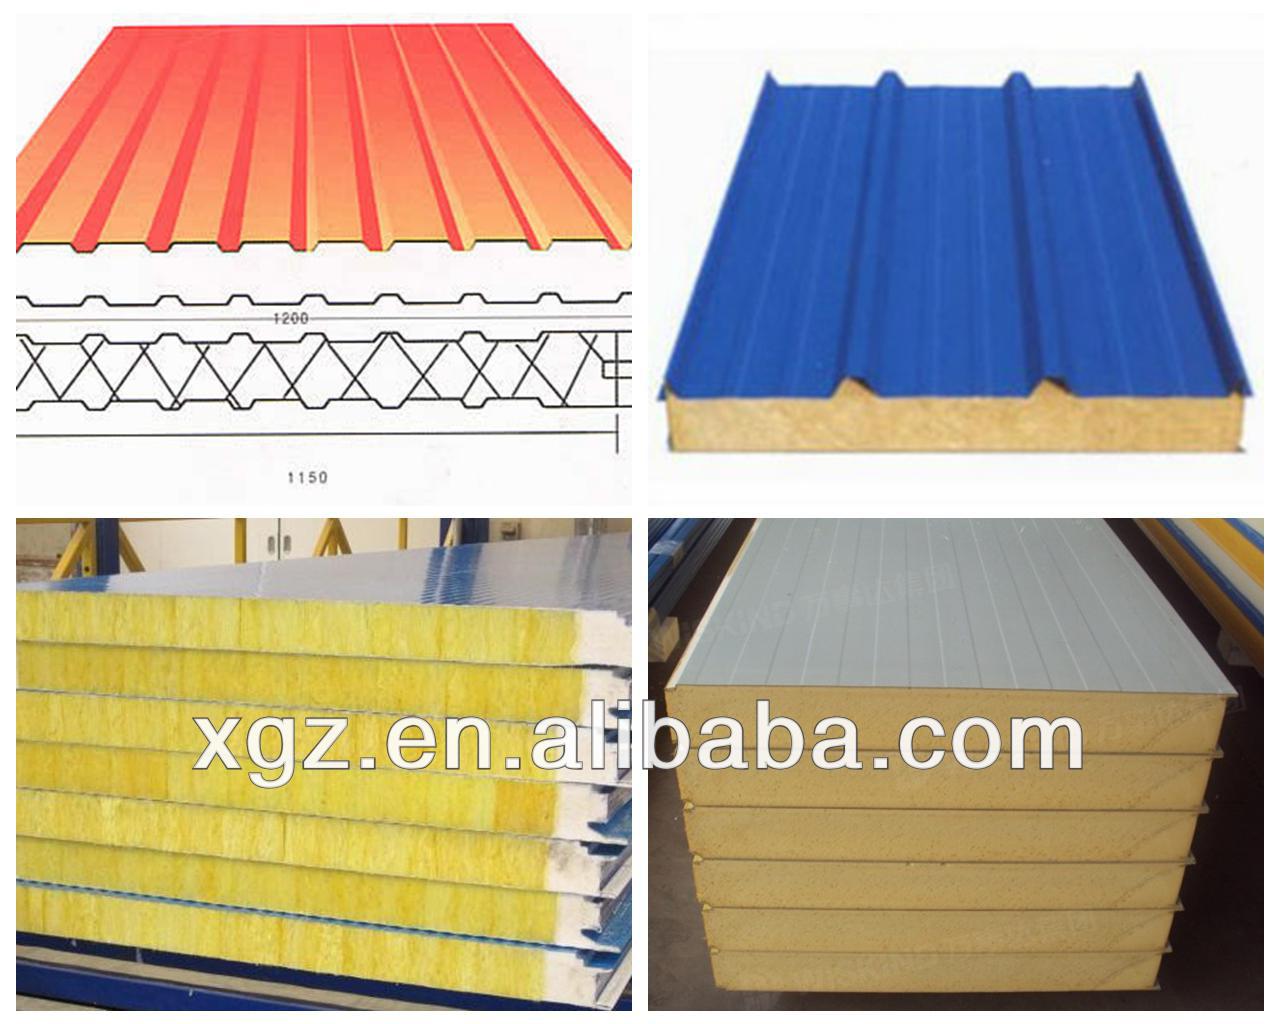 Steel Structure Building Construction Materials For Sale